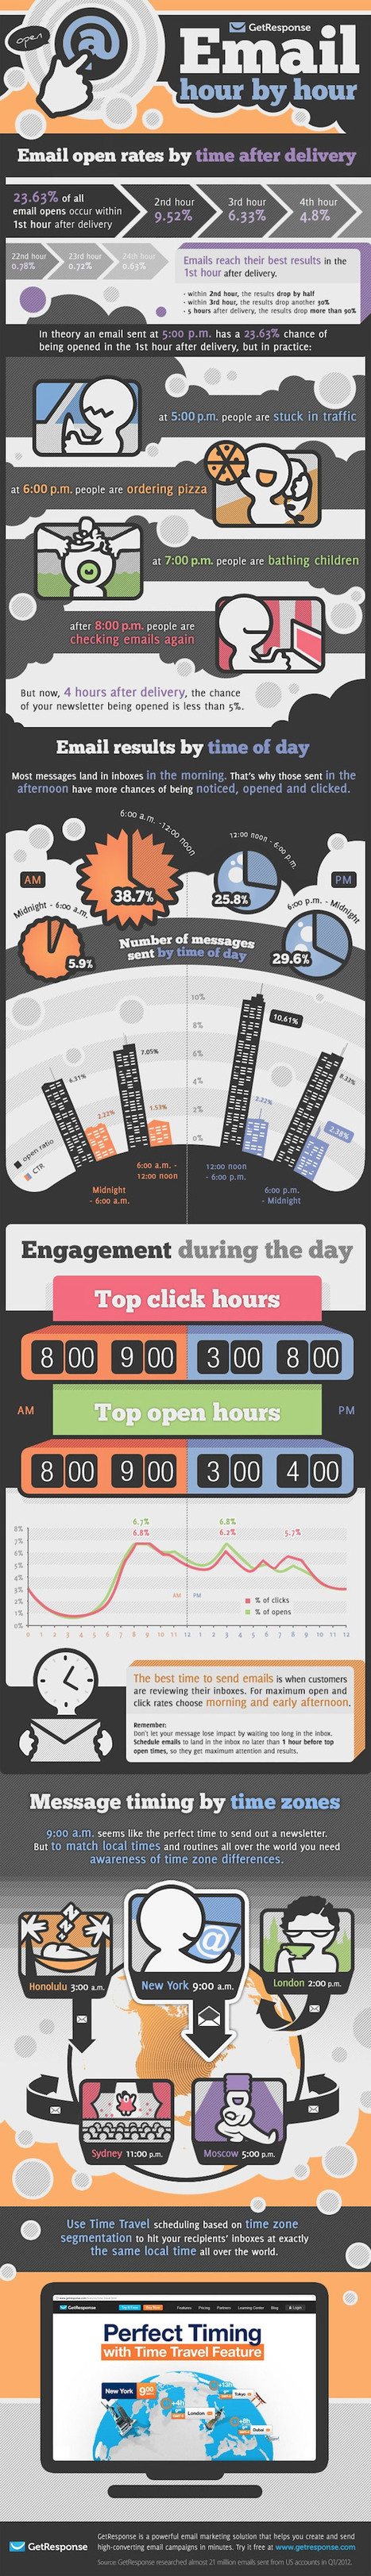 The Best Time Of The Day To Send Emails [INFOGRAPHIC] | Dyslexia, Literacy, and New-Media Literacy | Scoop.it